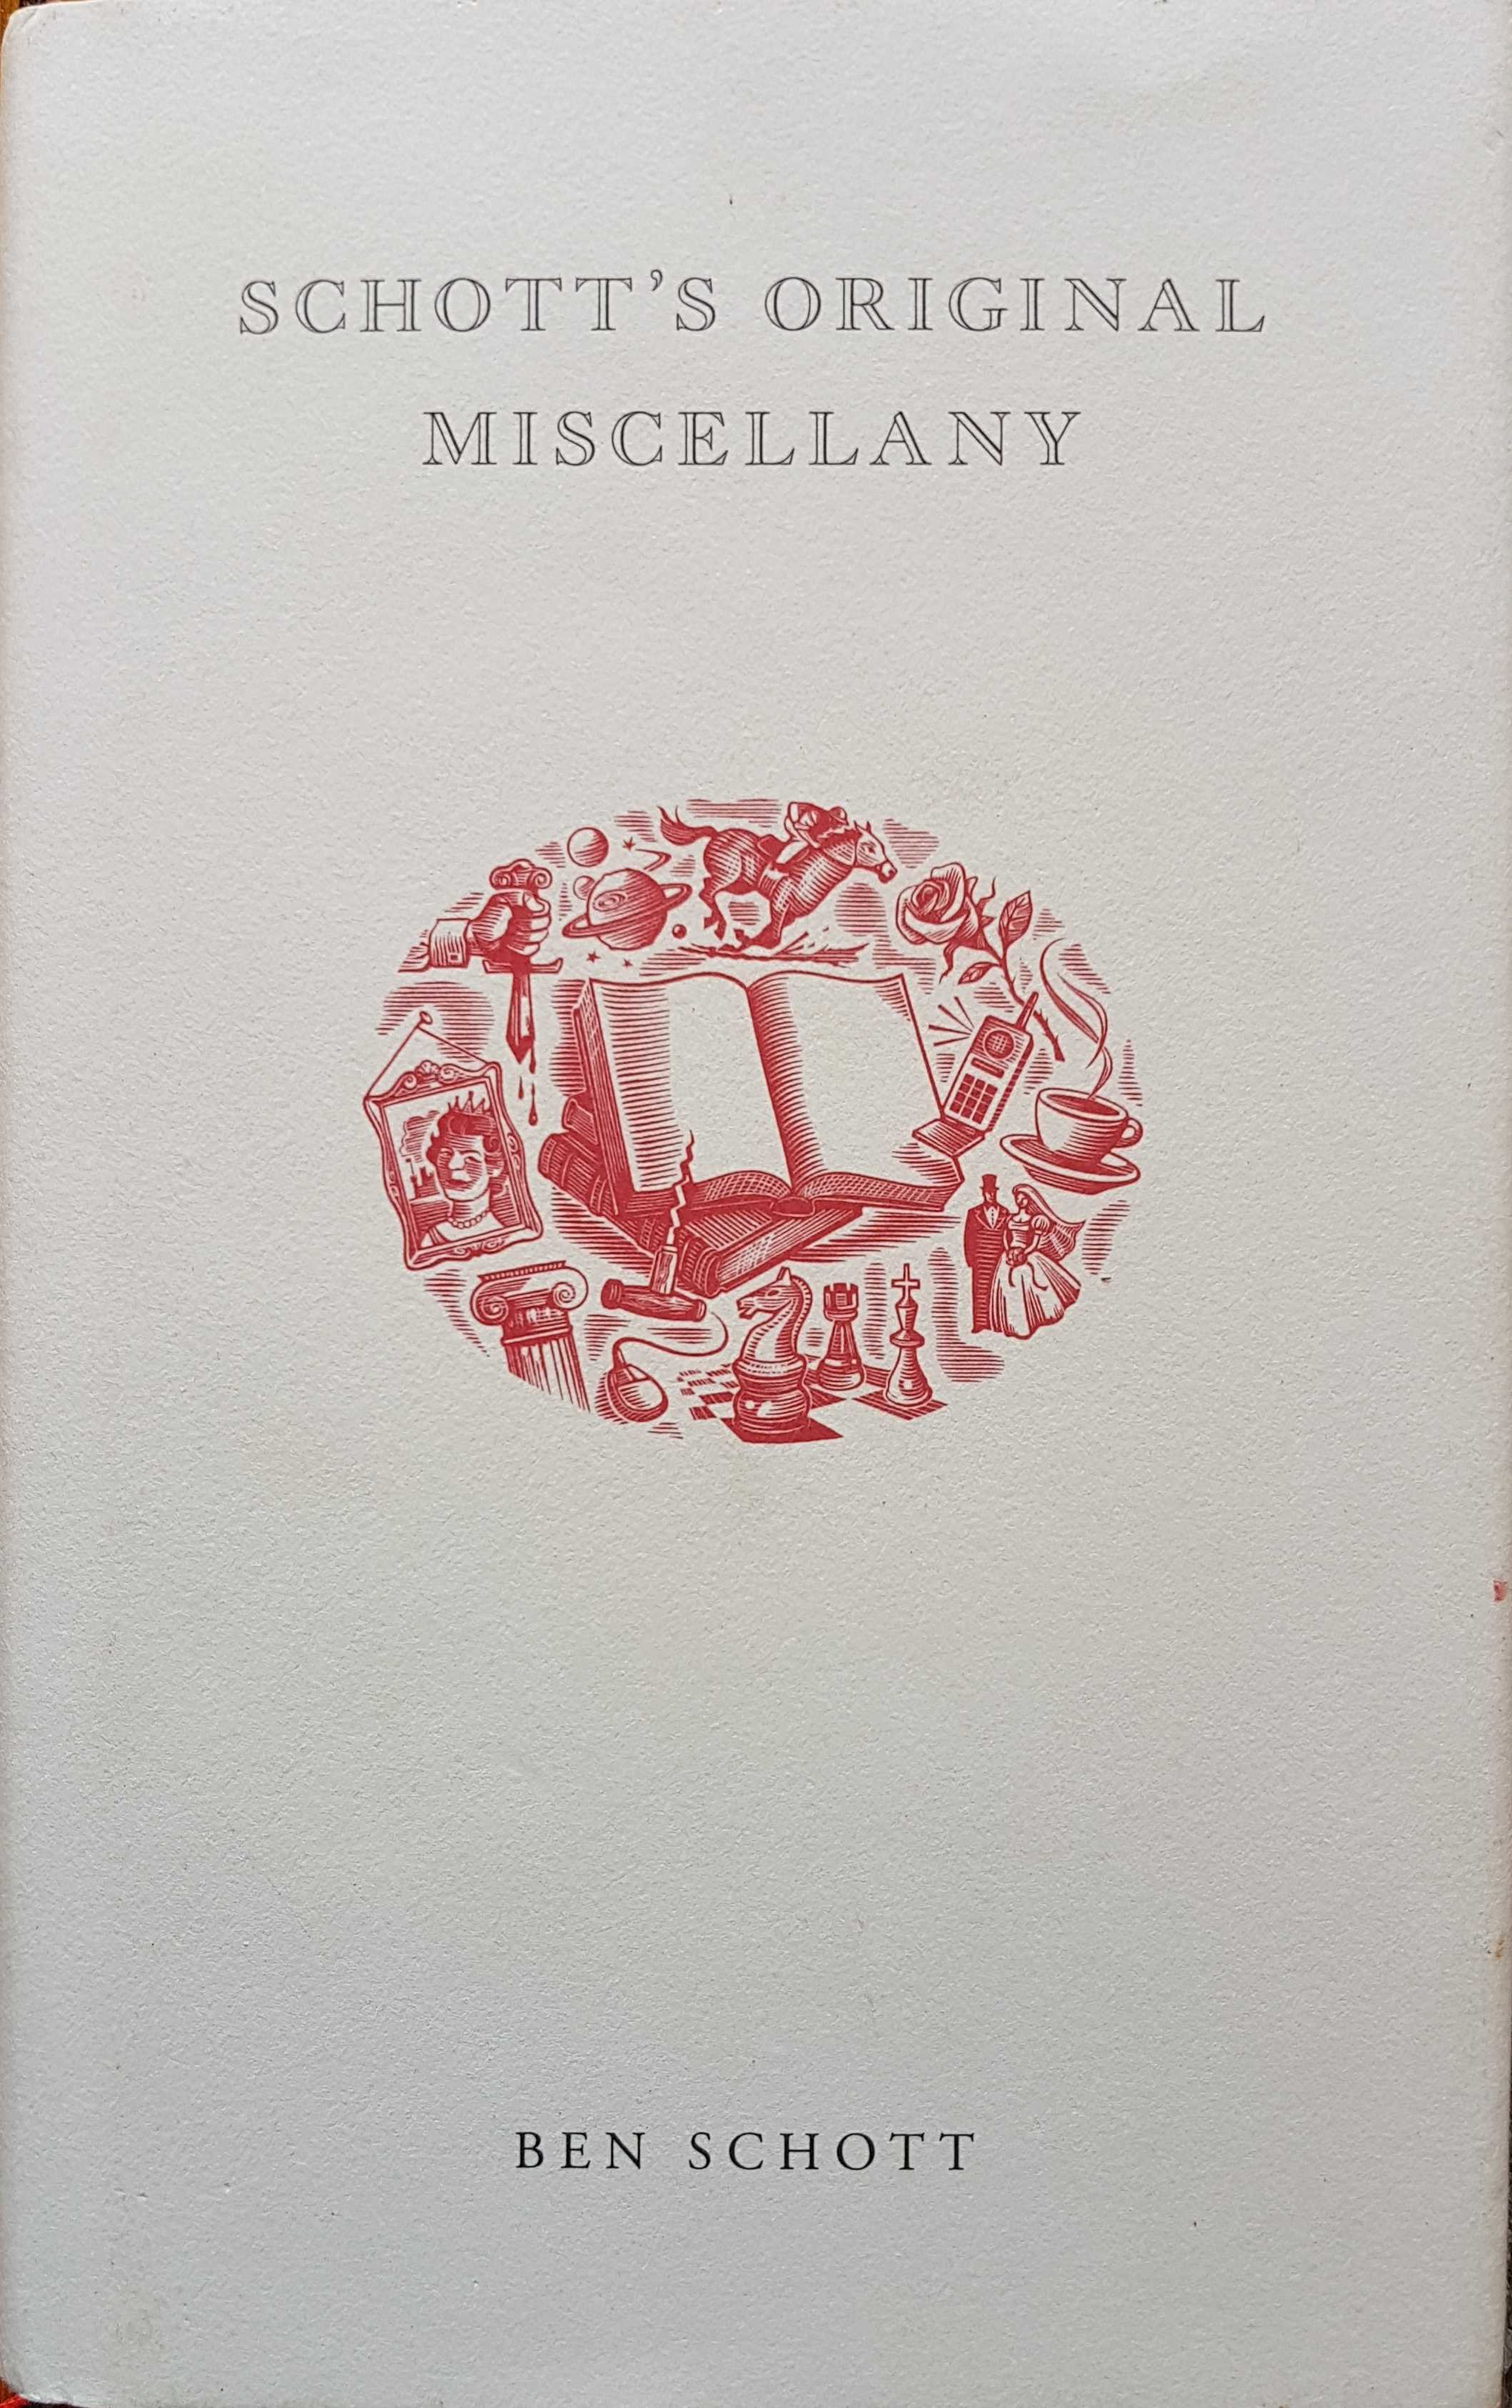 Picture of Schott's original miscellany by artist Ben Schott from ITV, Channel 4 and Channel 5 books library